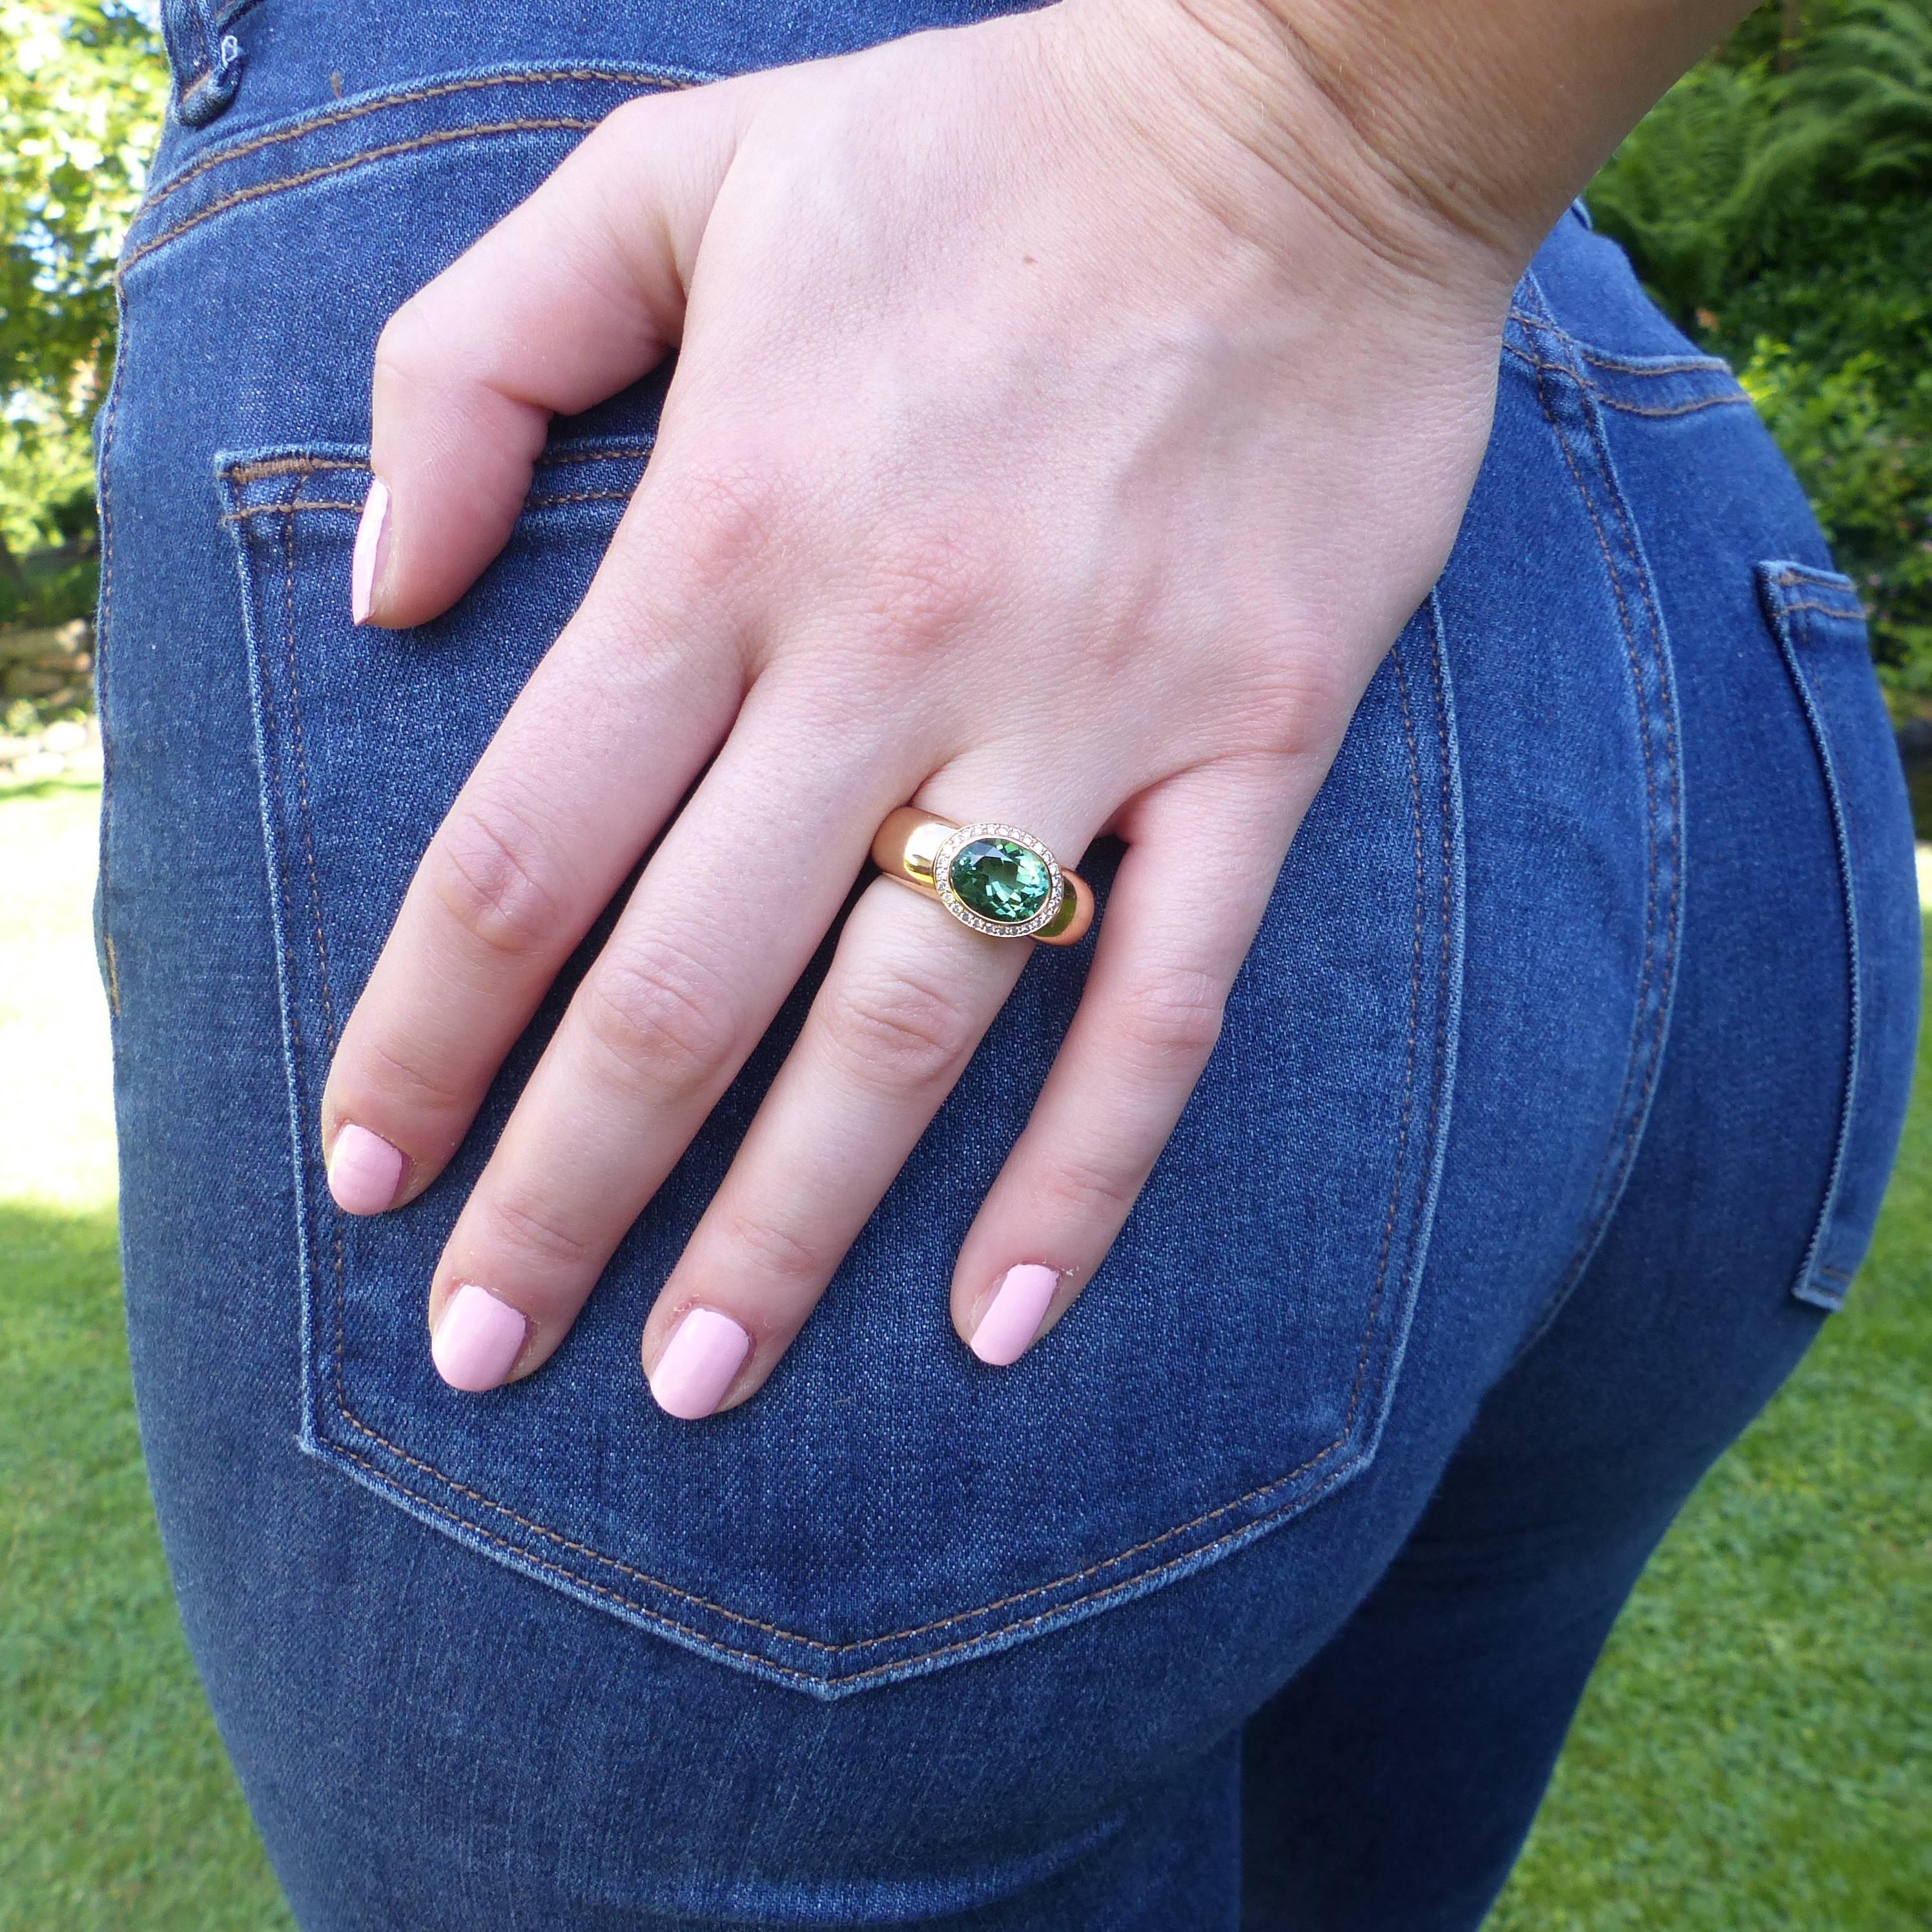 Women's Ring in Rose Gold with 1 Green Tourmaline and Diamonds. For Sale